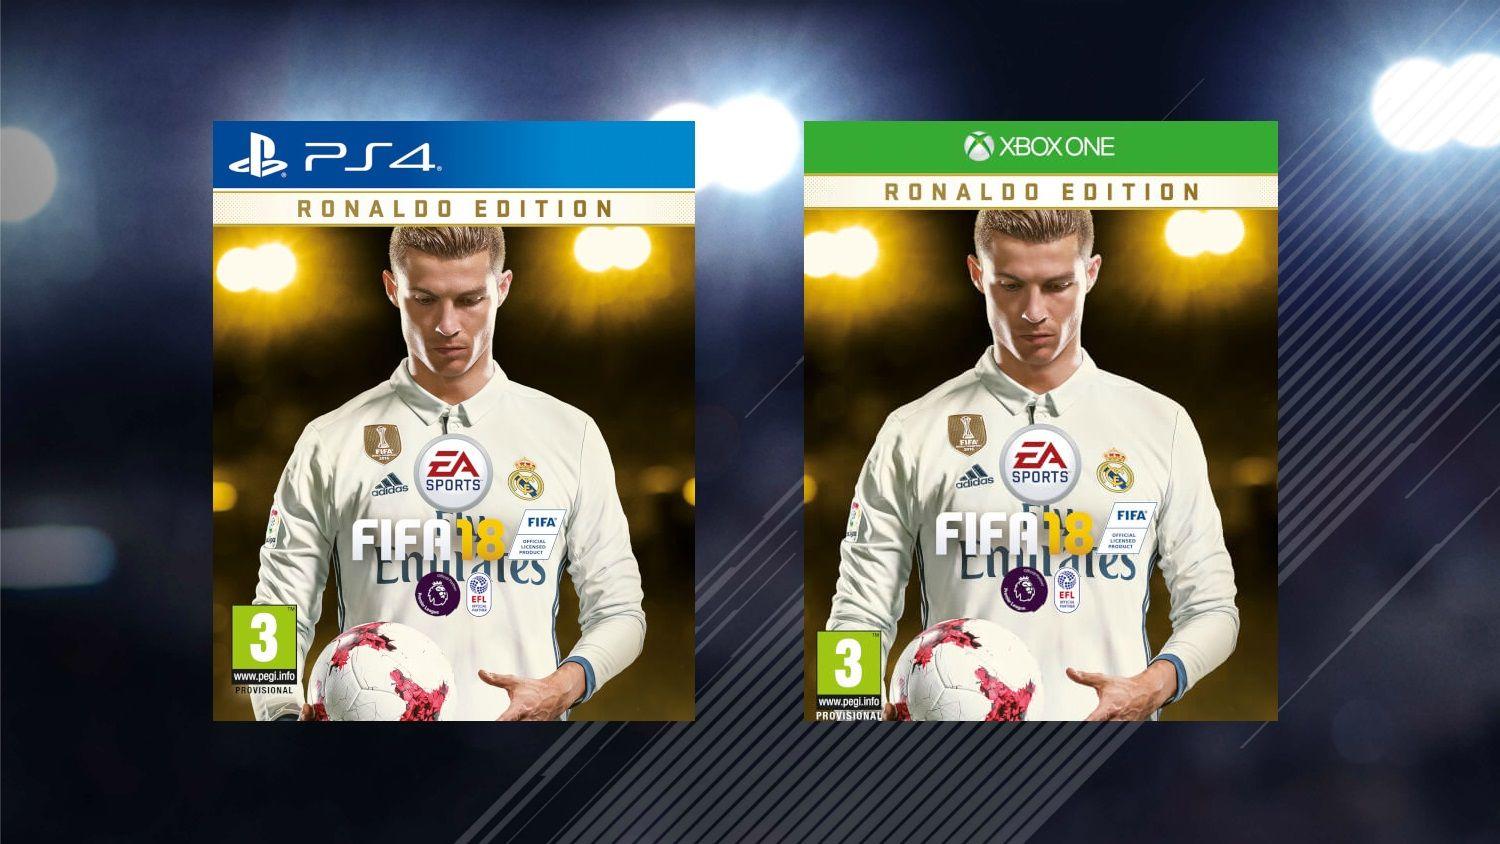 FIFA 18 Covers on Xbox, Playstation & PC Star Cristiano